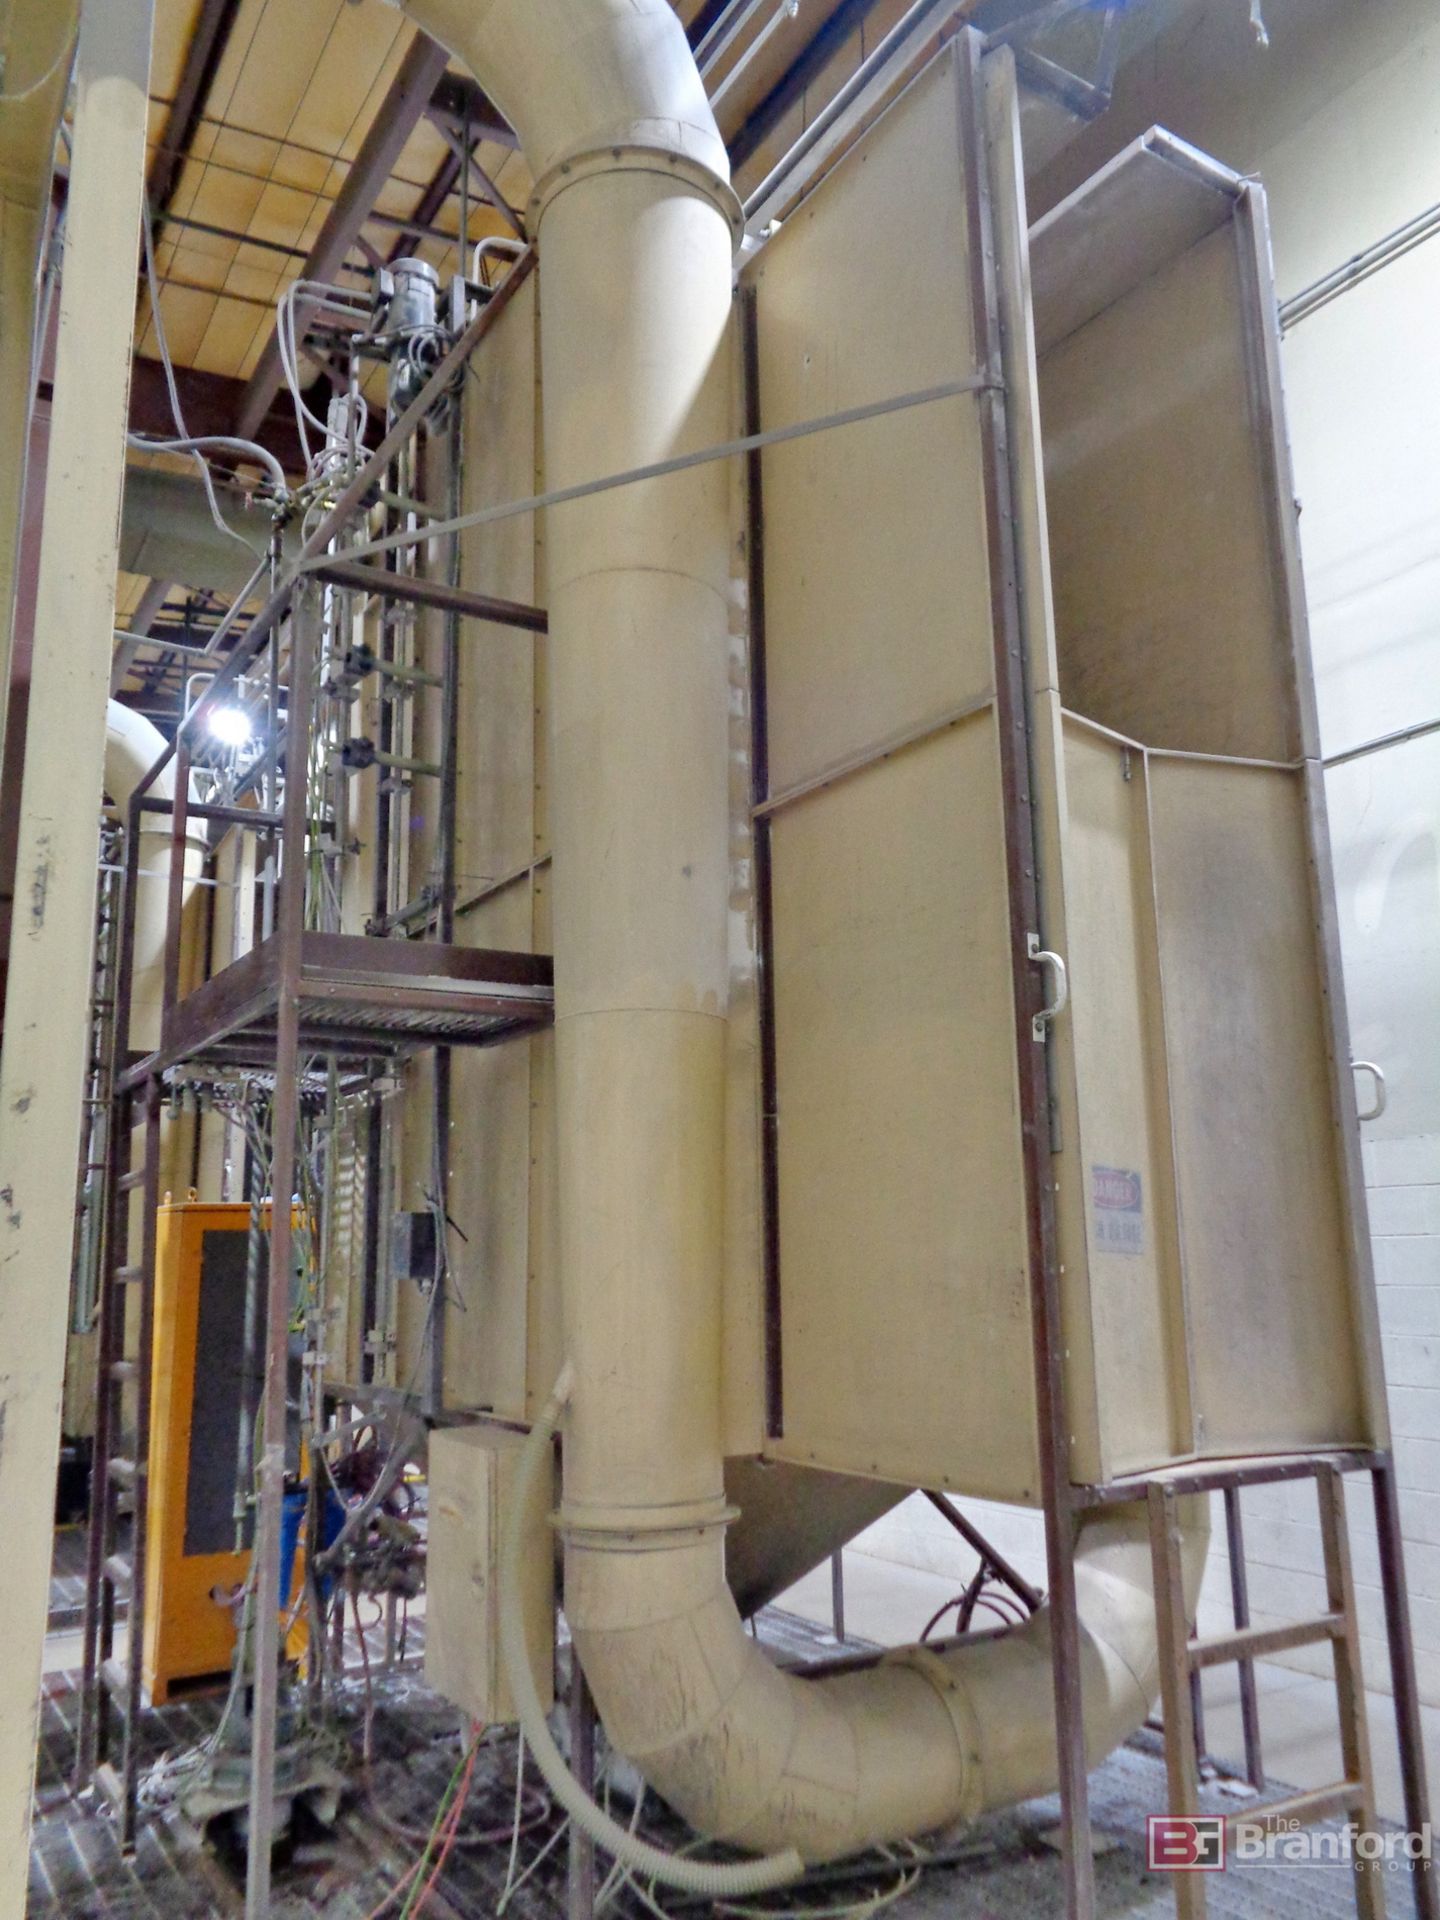 Thorid Automatic Powder Booth, Dust Collection, Cyclone System - Image 7 of 8